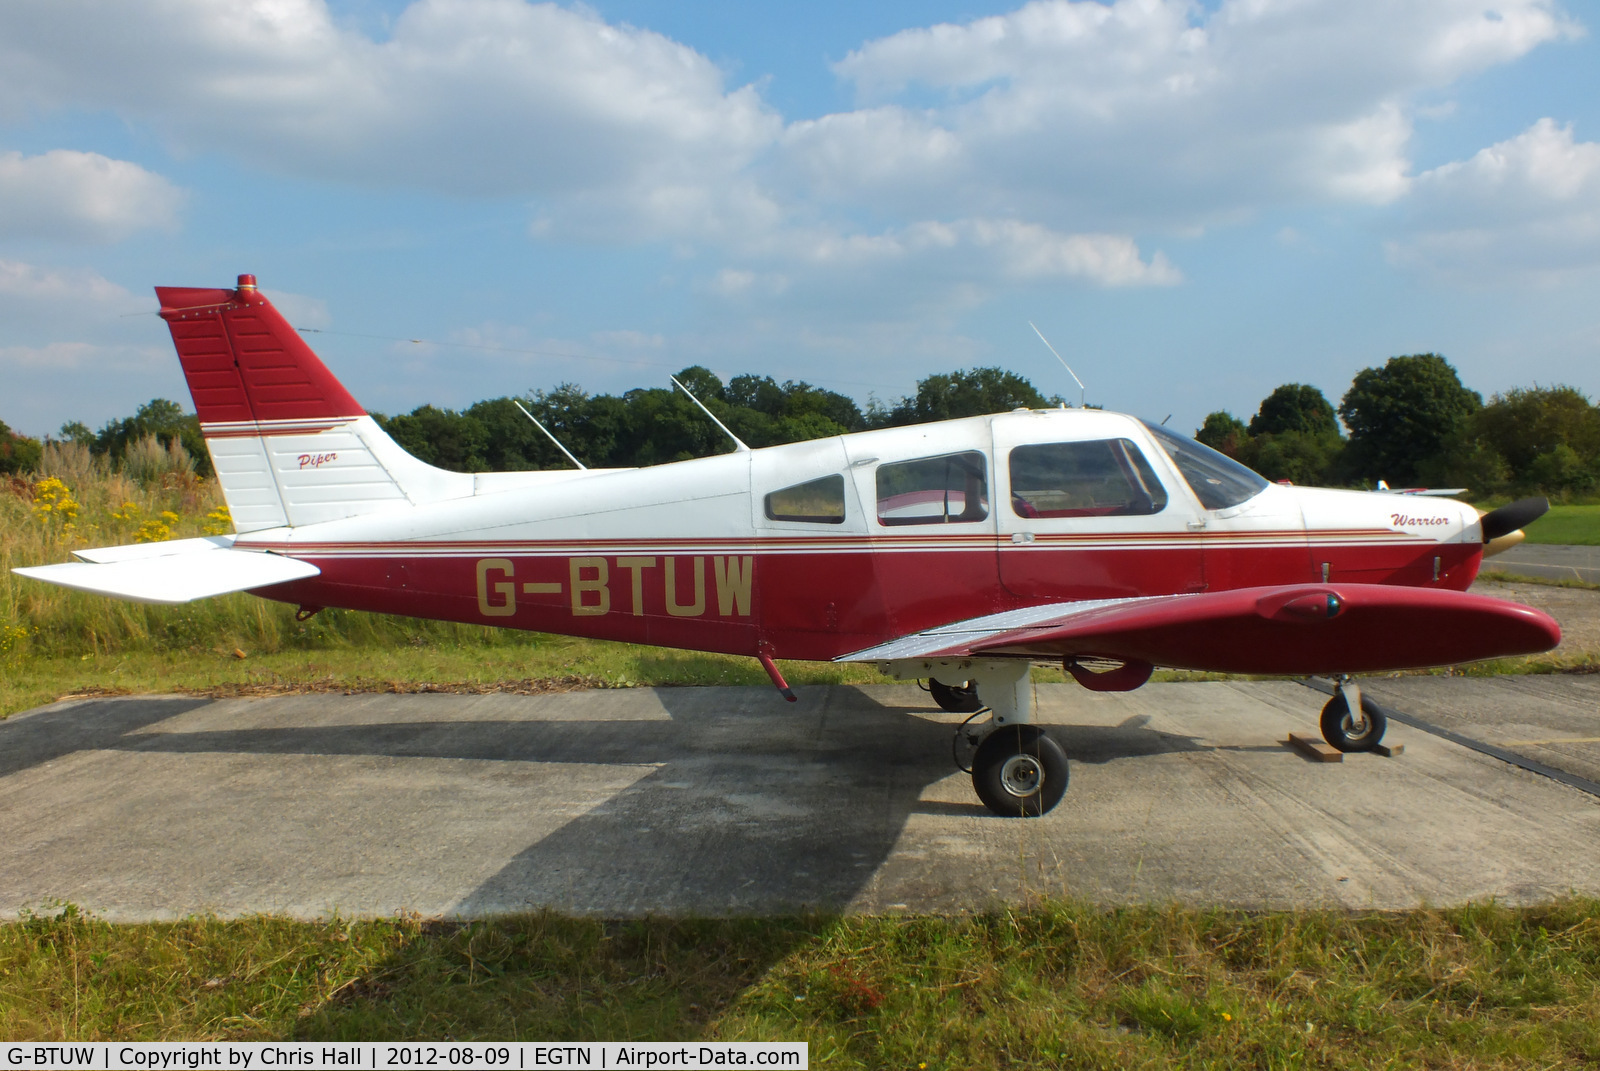 G-BTUW, 1974 Piper PA-28-151 Cherokee Warrior C/N 28-7415066, at Enstone Airfield